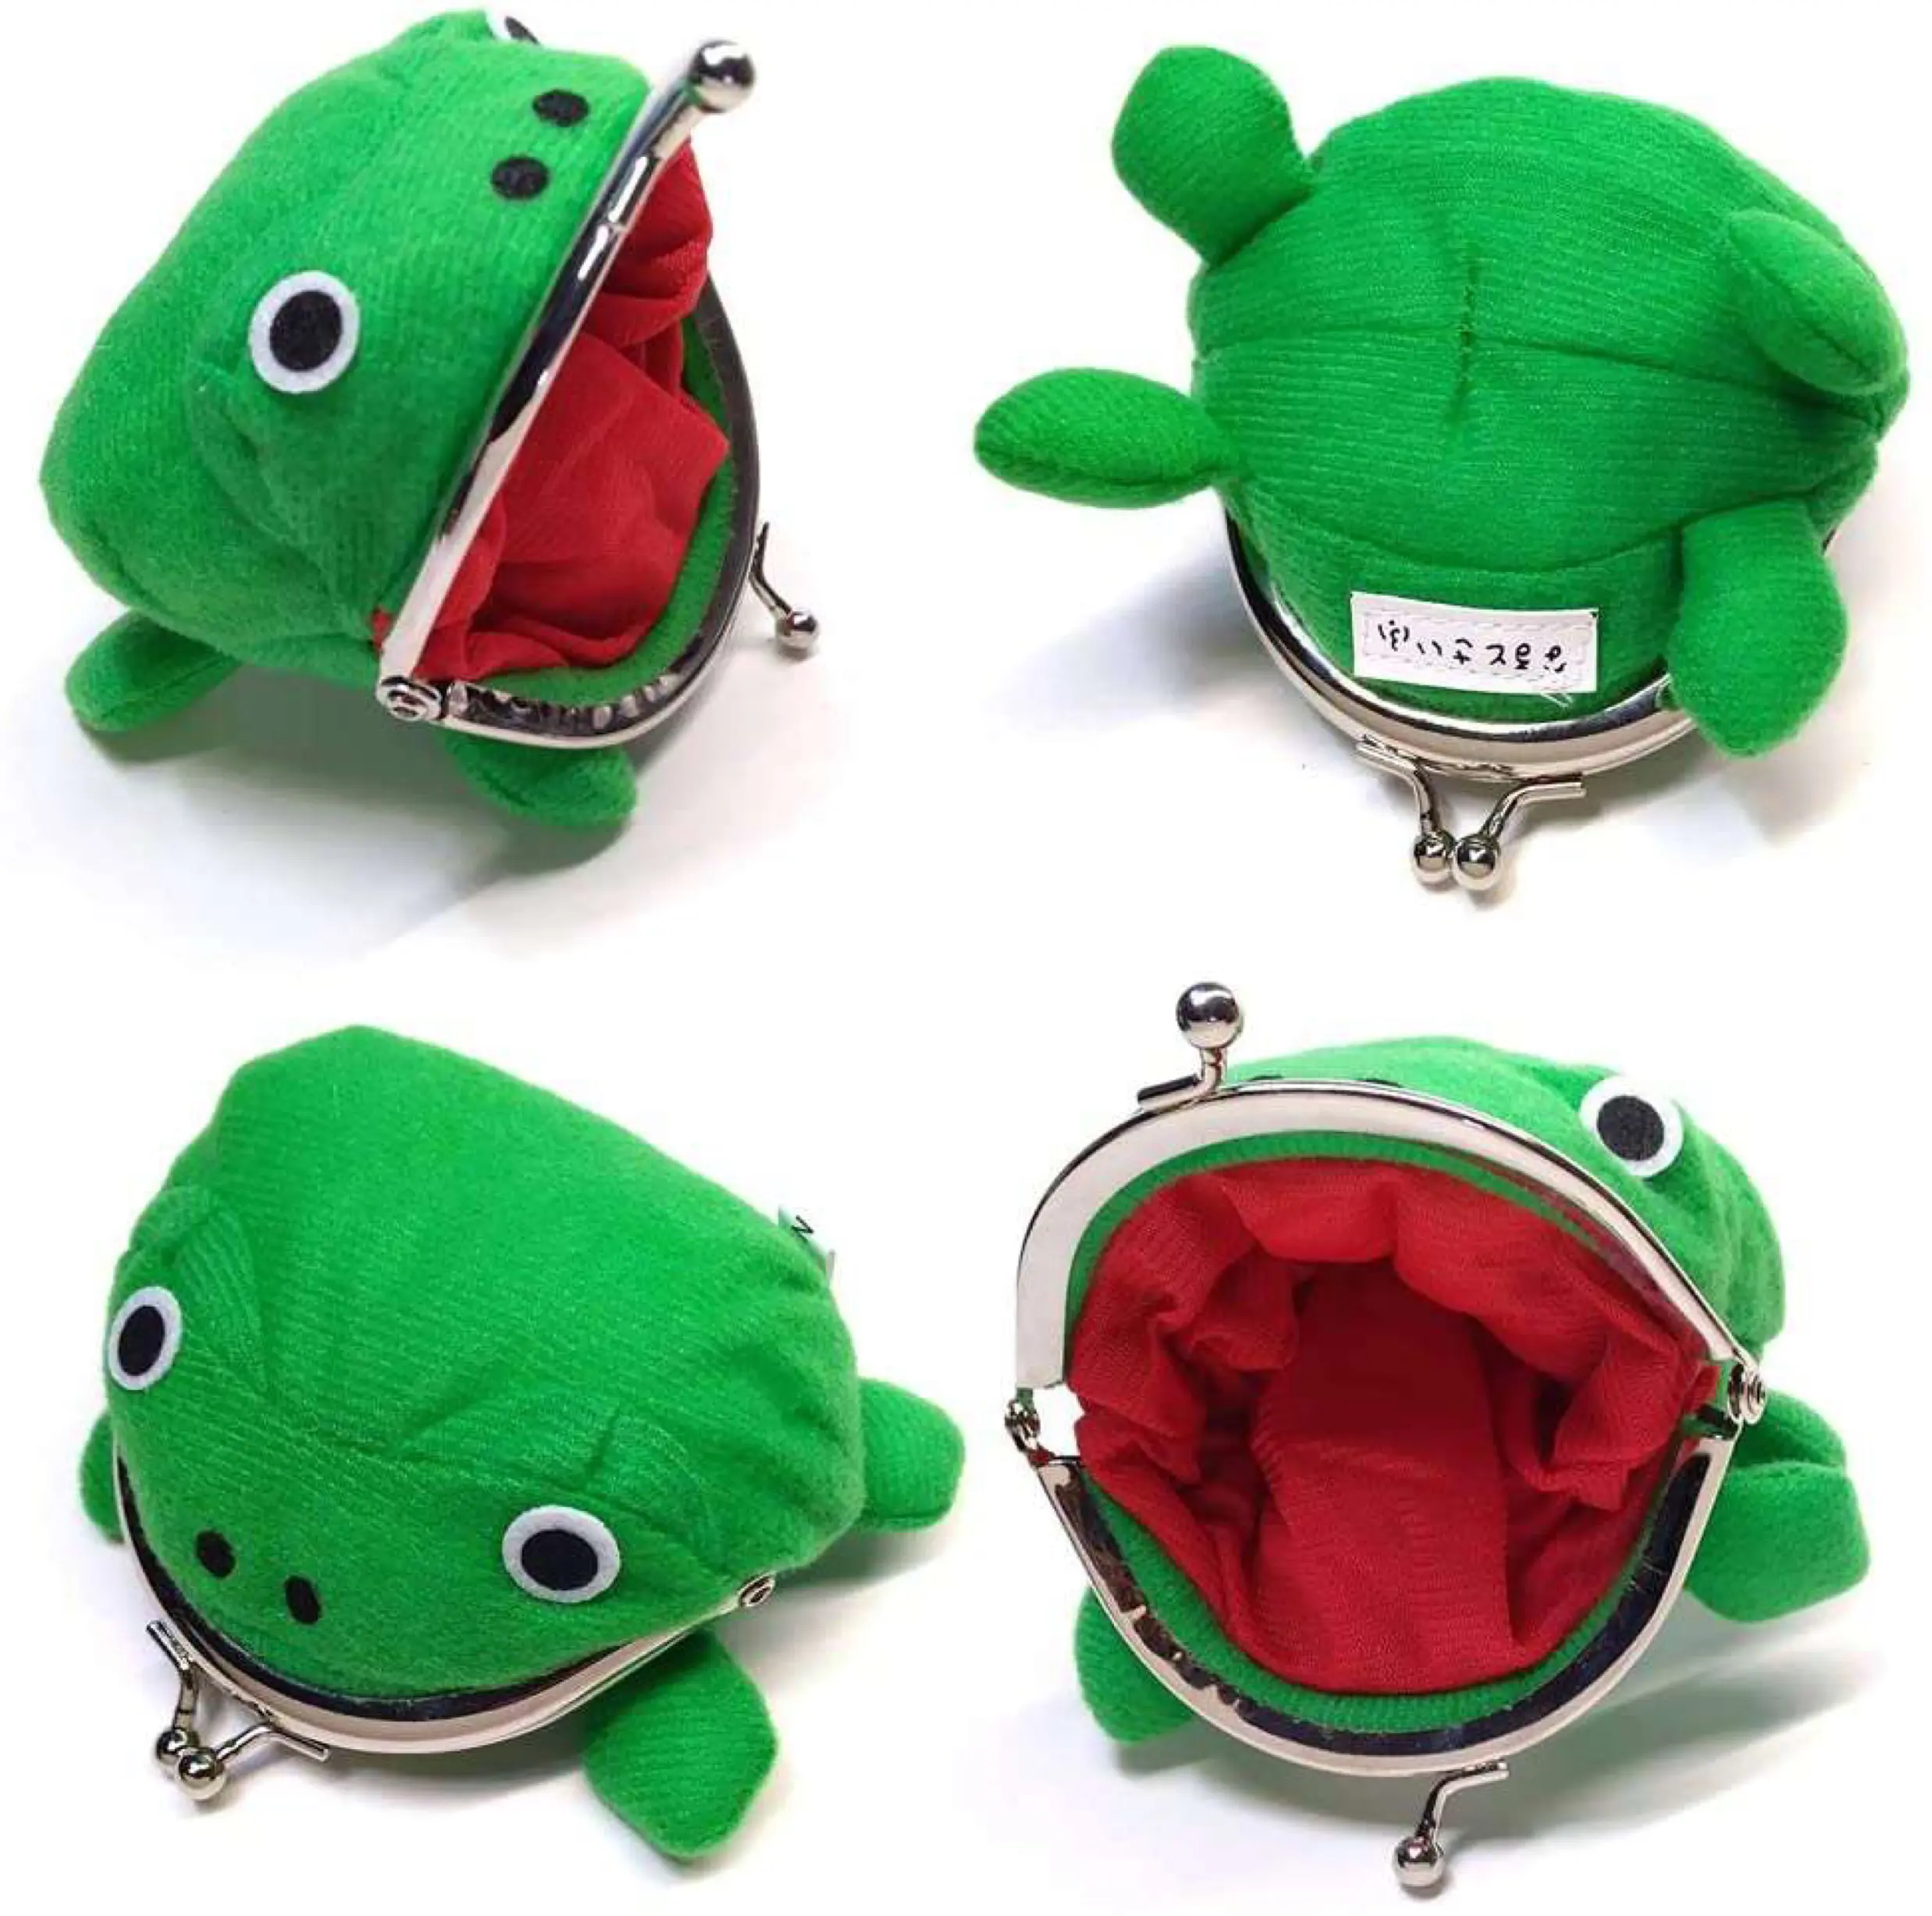 Novelty Adorable Anime Cartoon Frog Wallet Coin Purse Key Chain Cute Plush Frog Cartoon Cosplay Purse For Women Bag Accessories